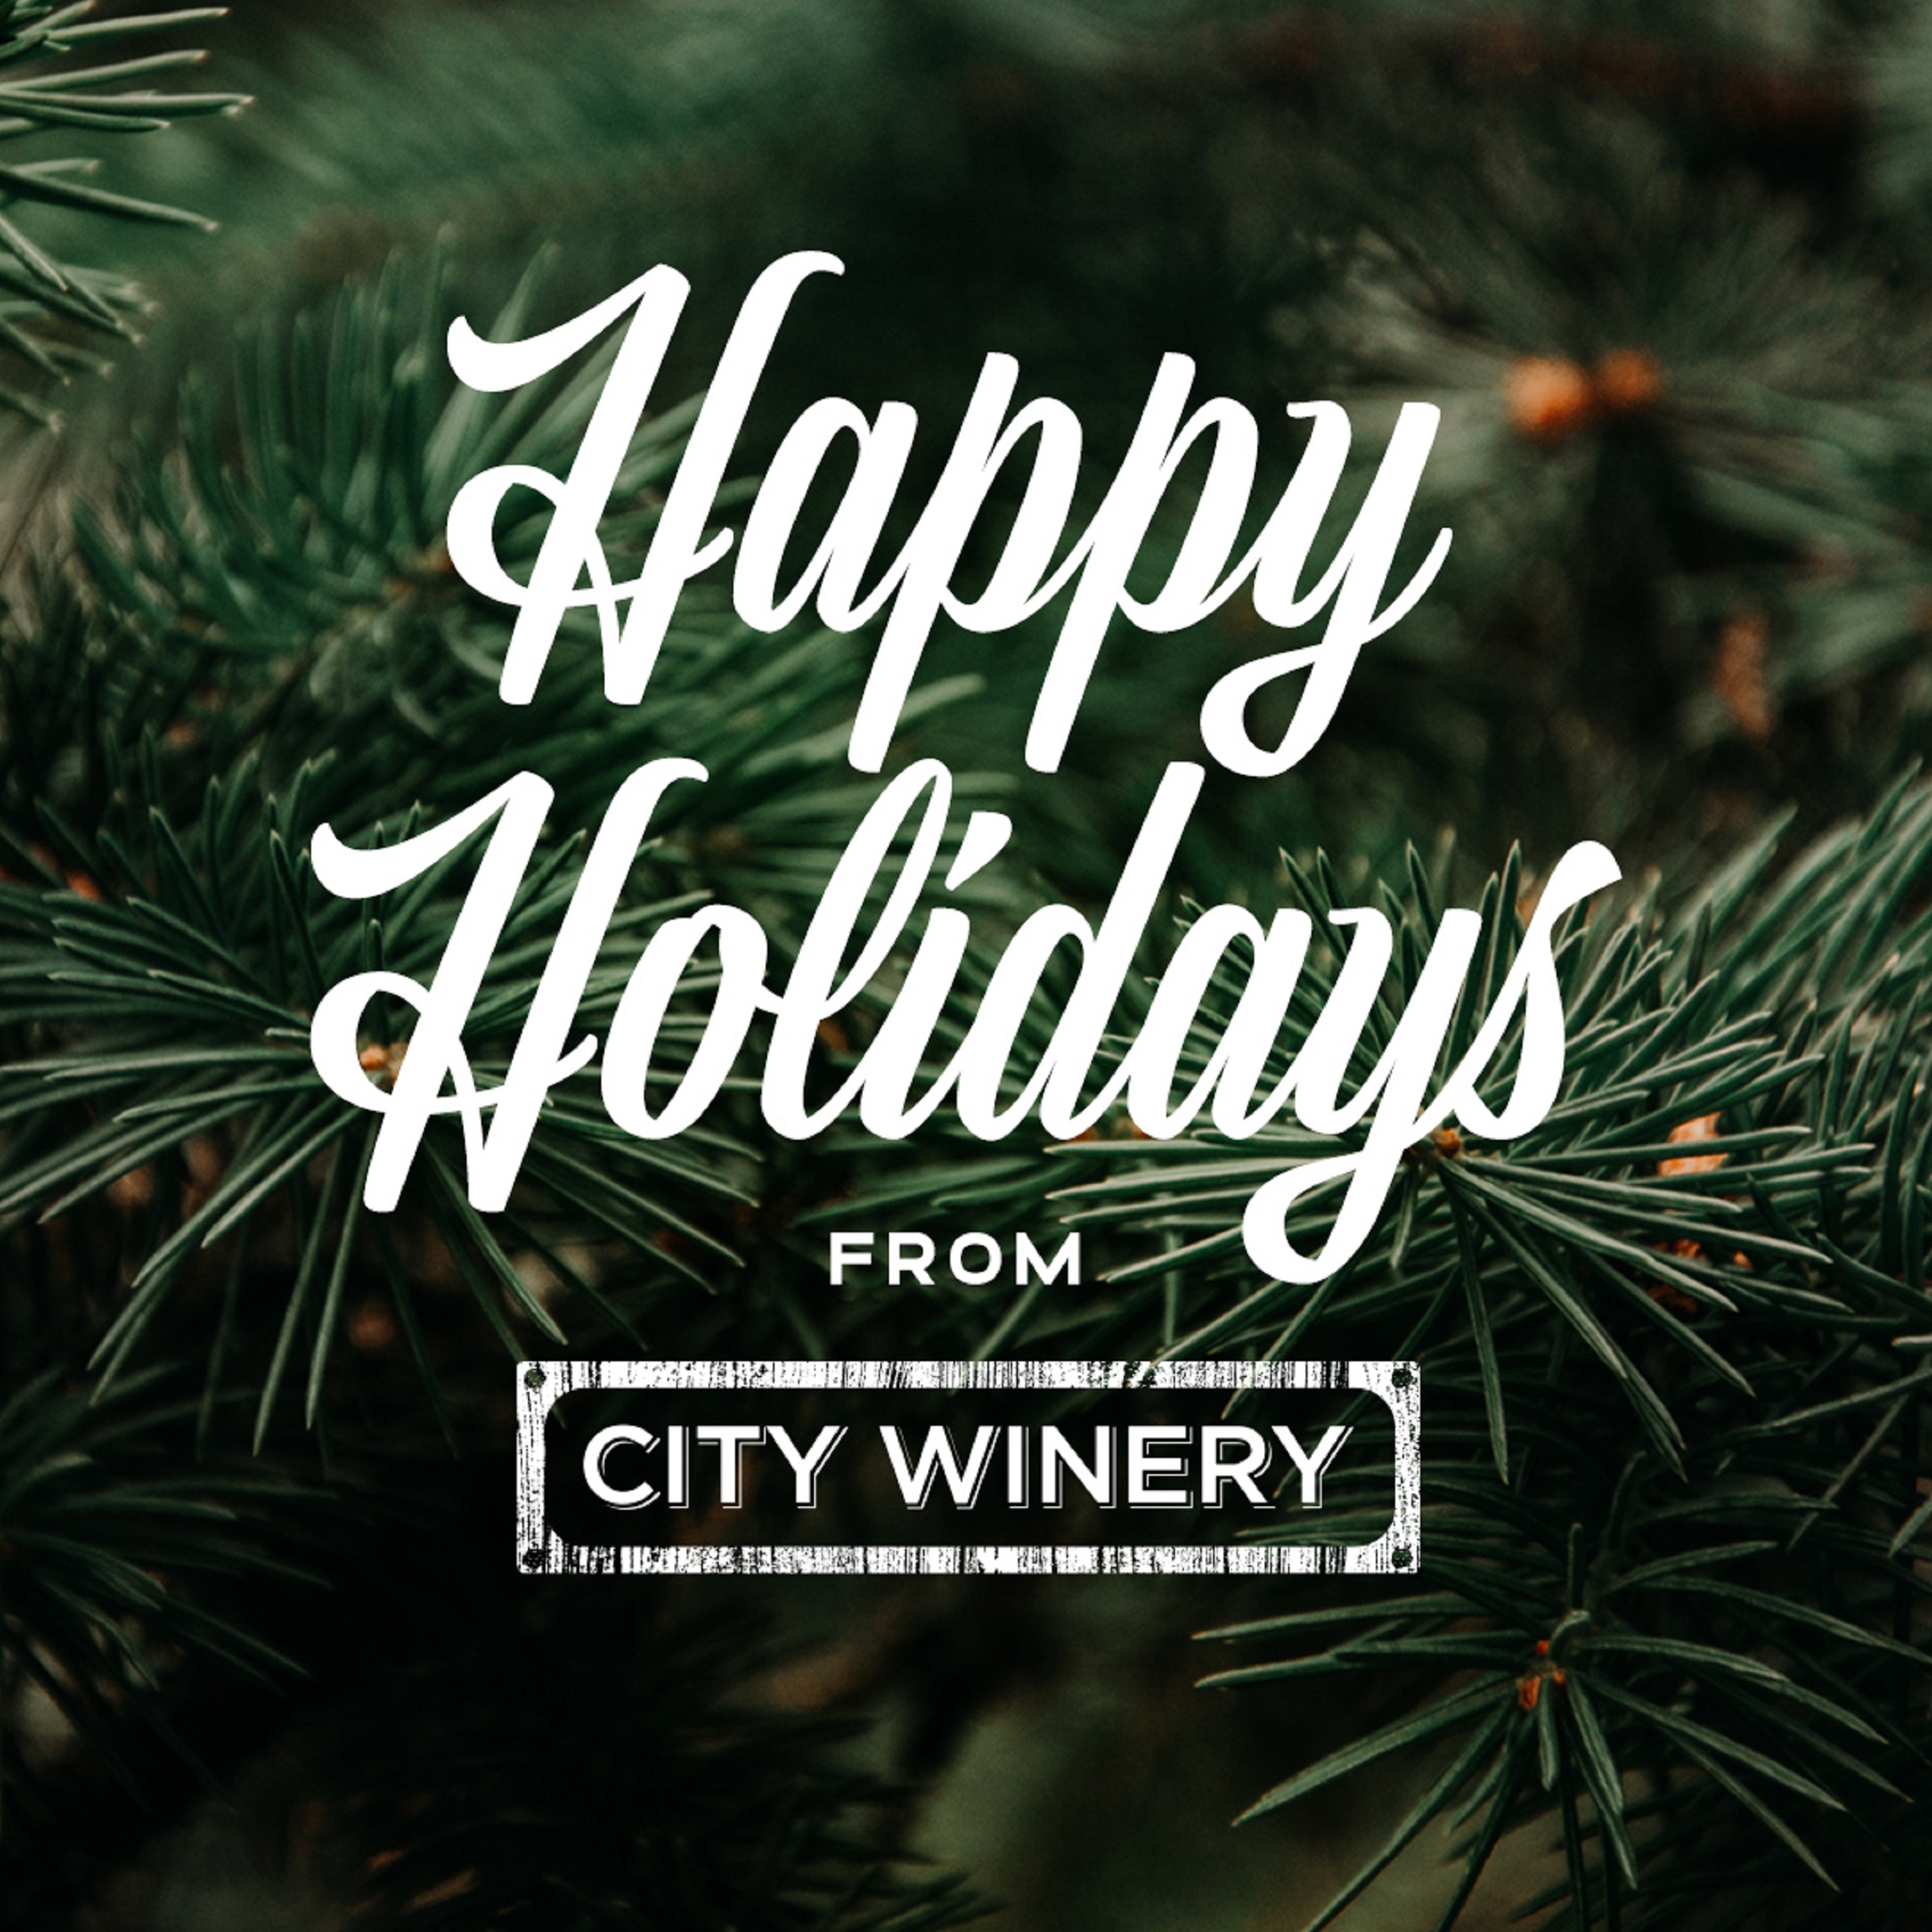 CITY WINERY BOSTON Celebrates the Holiday Season with Music, Comedy, Wine and even a Nutcracker